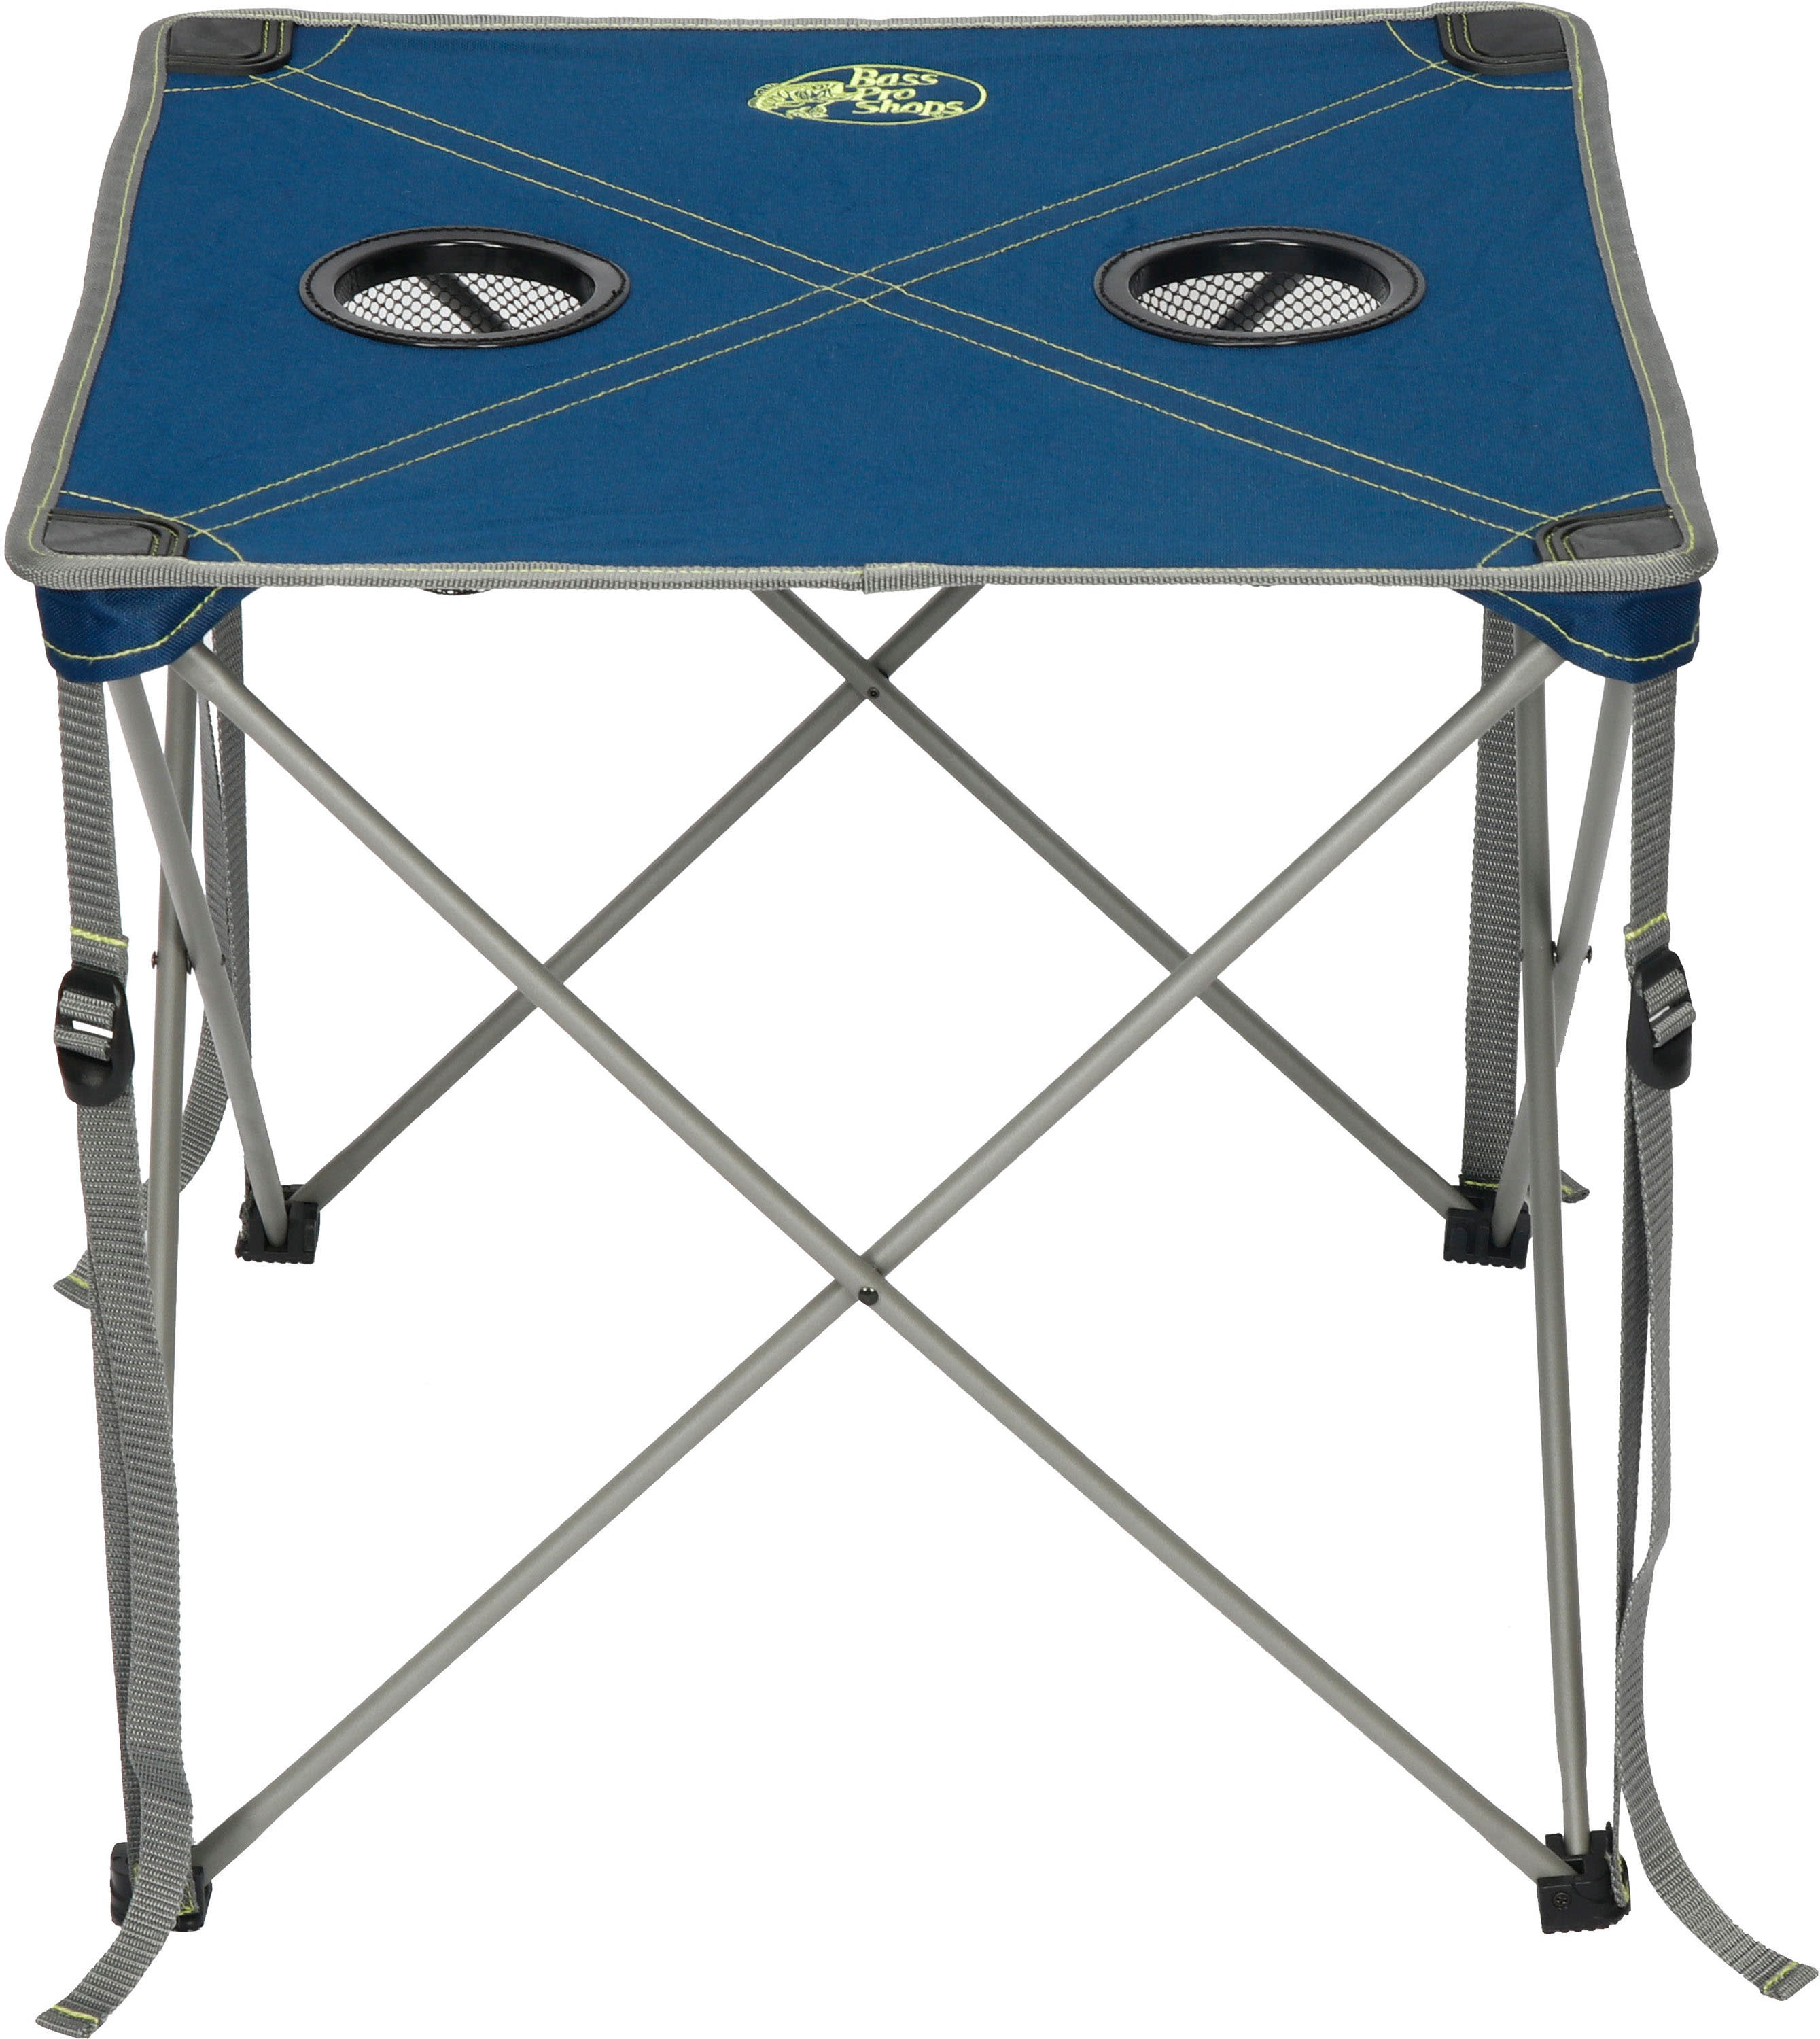 Bass Pro Shops® Fabric Table 